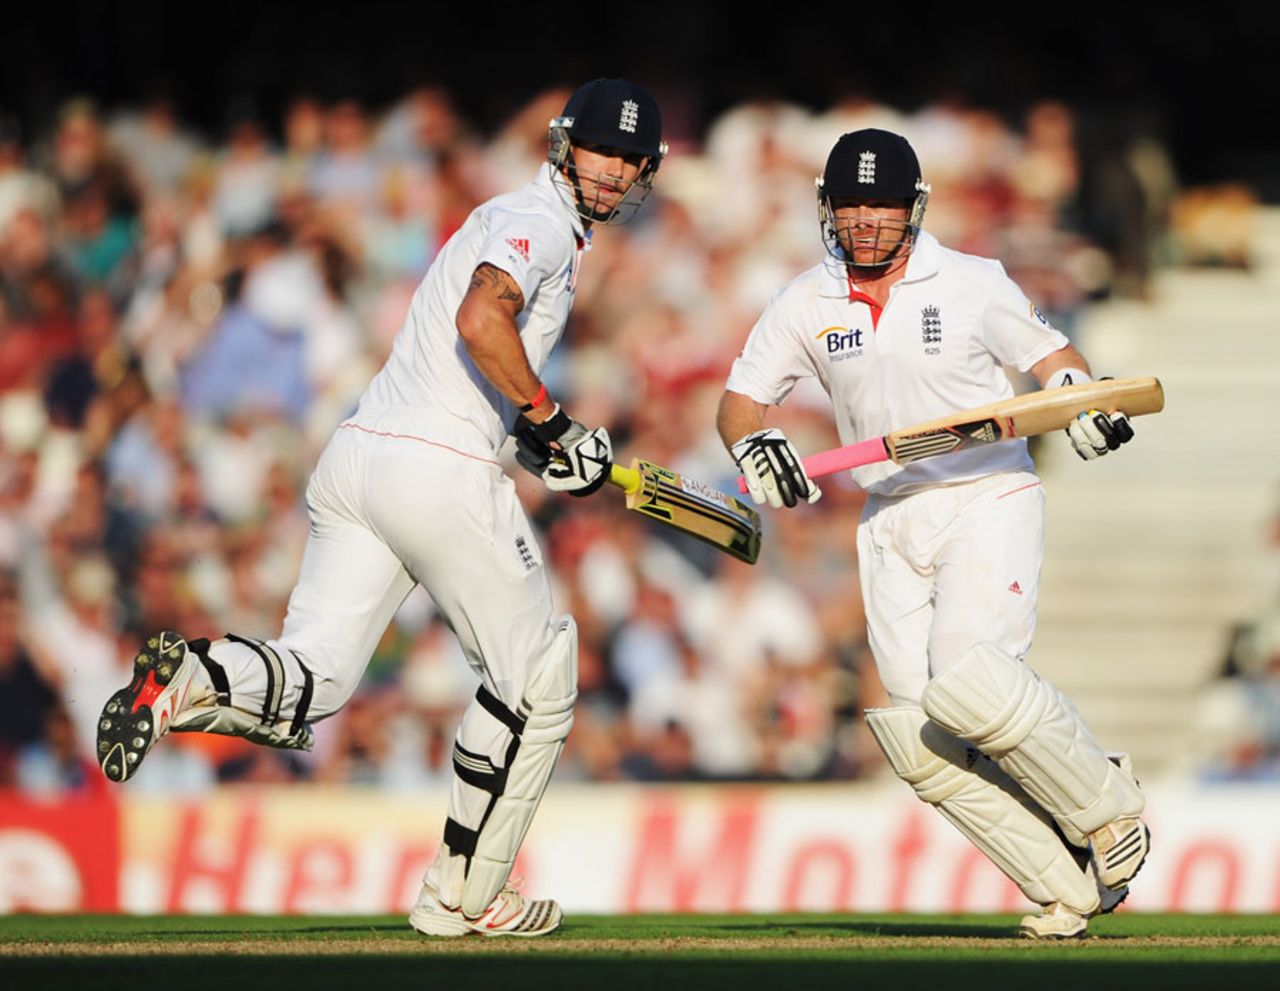 Kevin Pietersen and Ian Bell take a run during their 350-run stand, England v India, 4th Test, The Oval, 2nd day, August 19, 2011